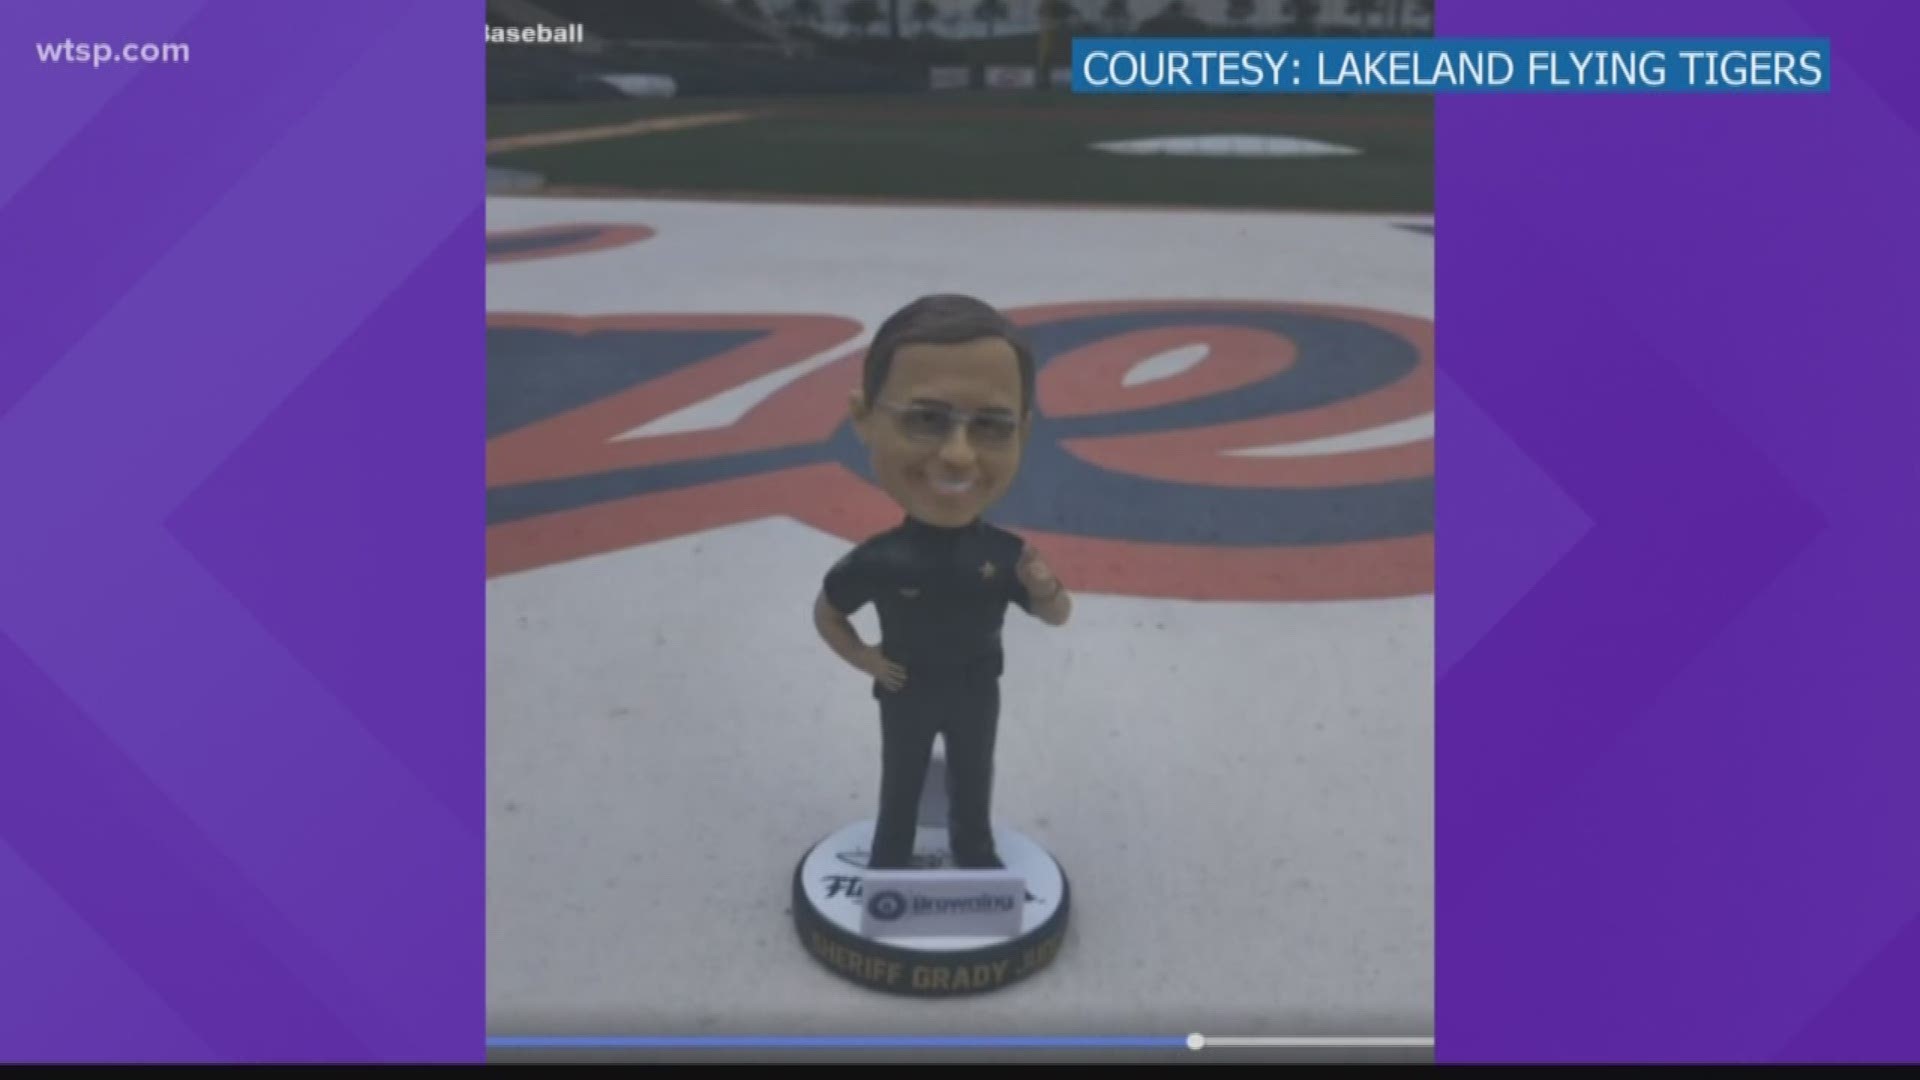 The Lakeland Flying Tigers are giving out bobbleheads of Polk County Sheriff Grady Judd ahead of their Friday night game at Publix Field at Joker Marchant Stadium.

The first 1,200 fans ages 13 and older will receive a voucher upon entry into the stadium. Fans with vouchers can then claim one bobblehead each, starting in the fifth inning.